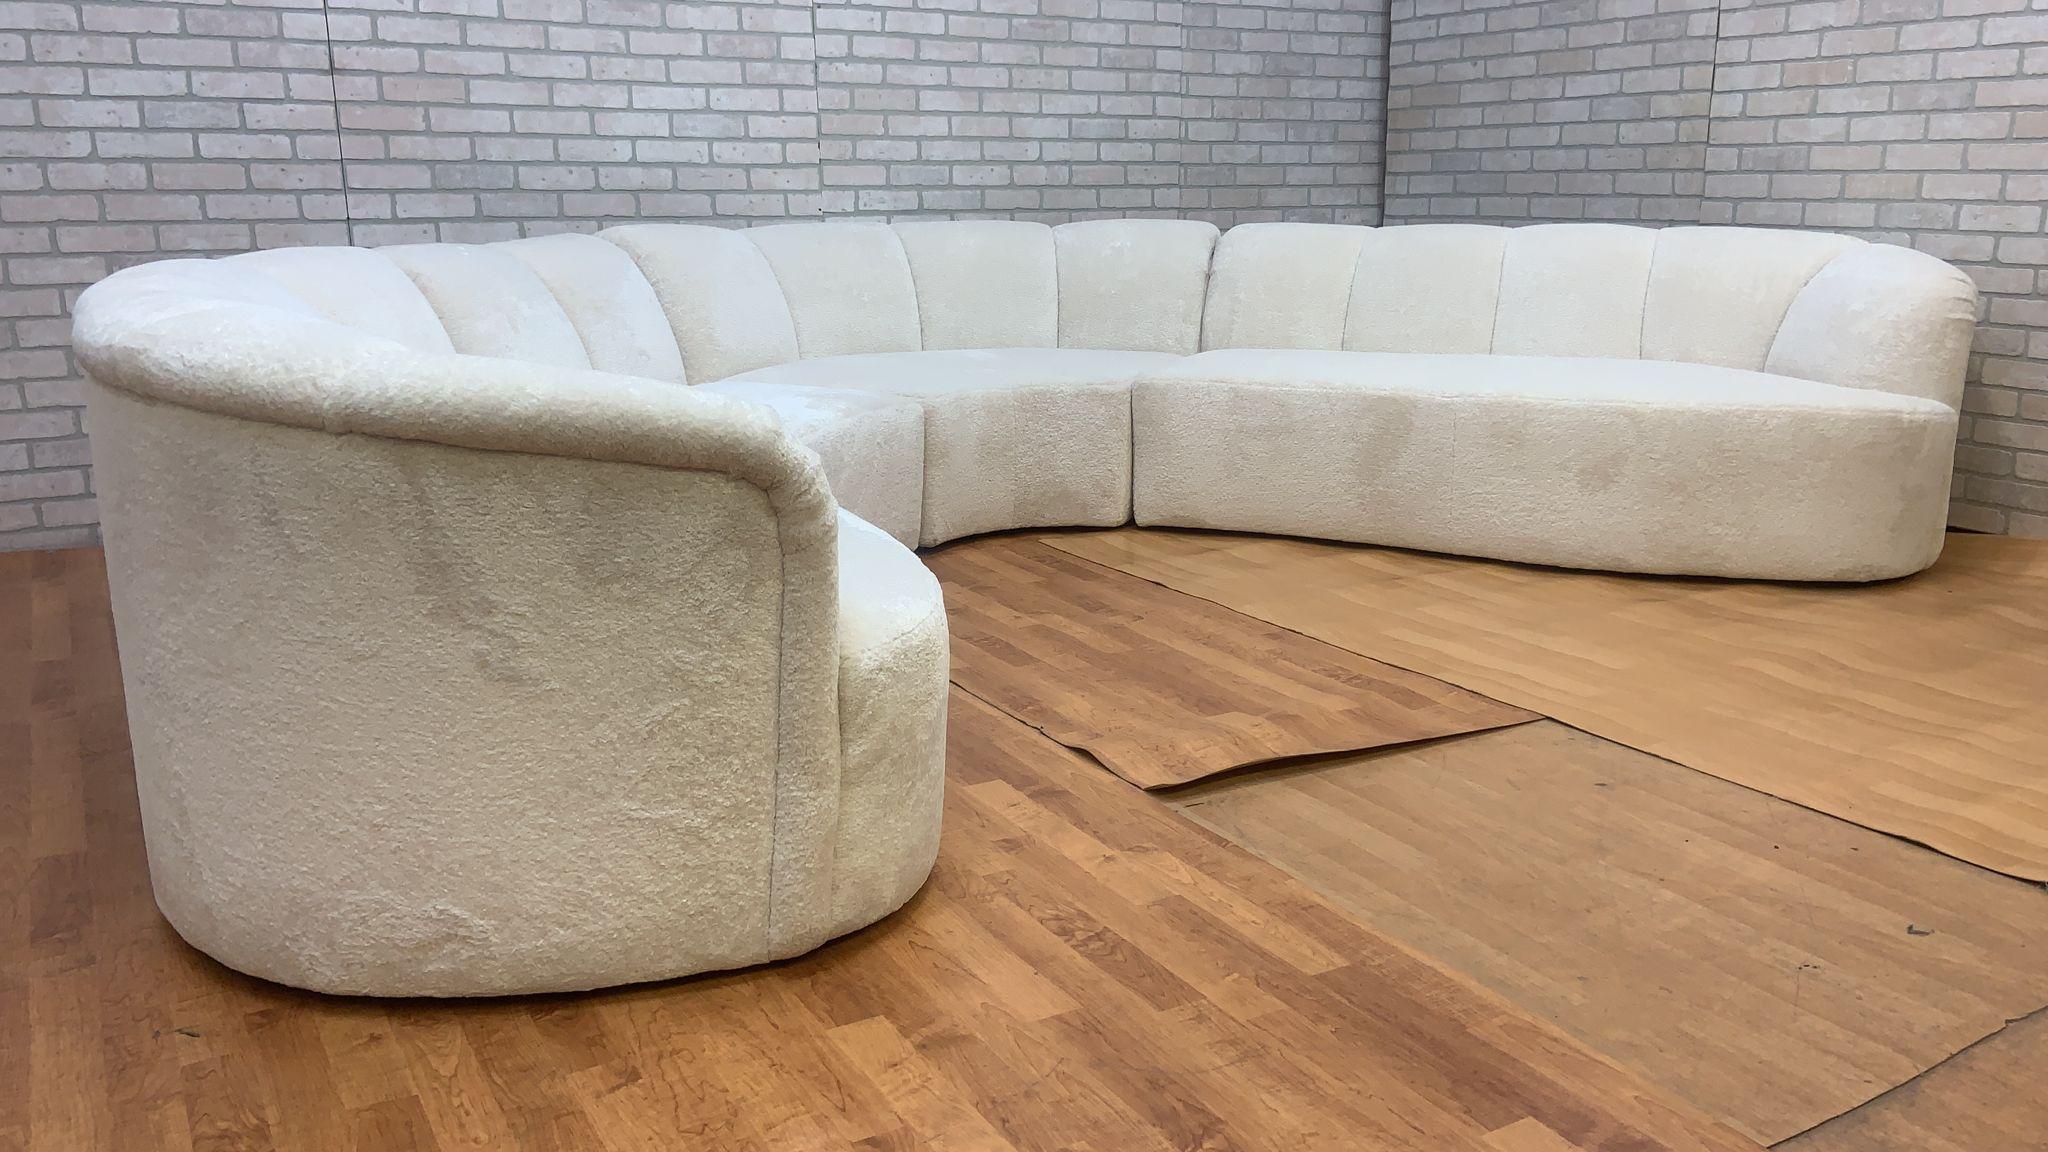 Curved Channel Back Serpentine Sectional Sofa Newly Upholstered in Alpaca Wool 6